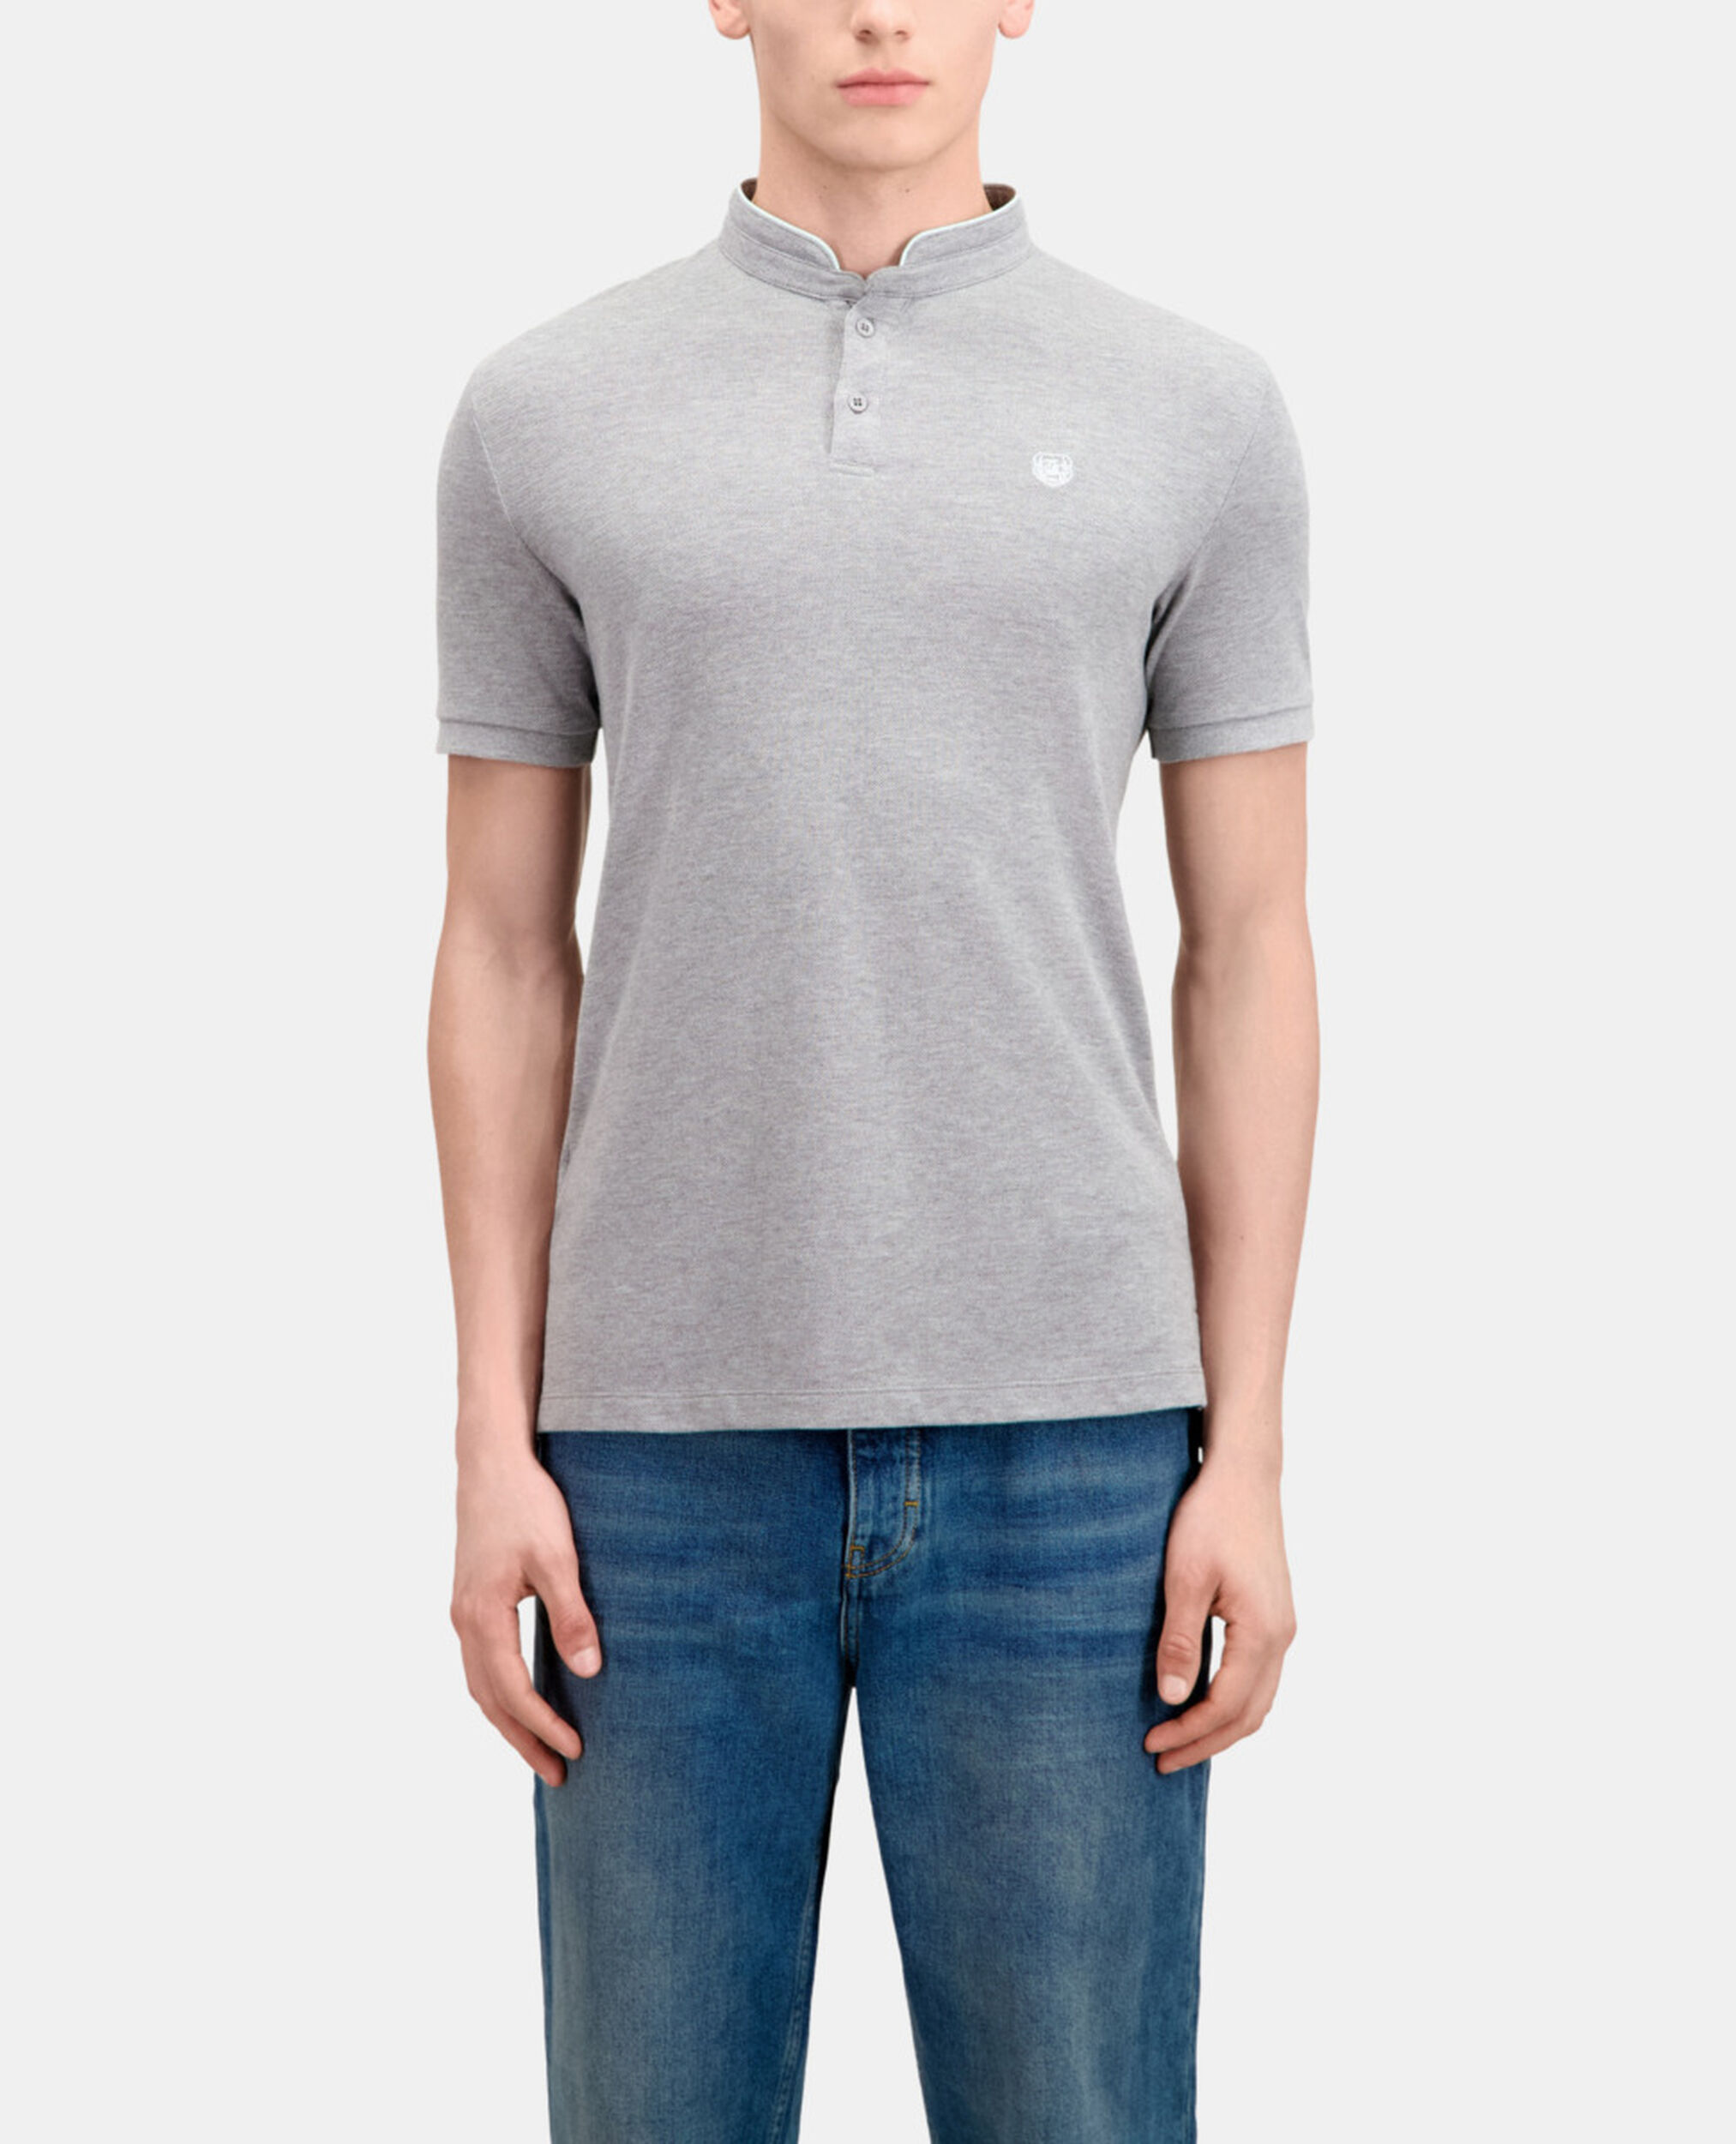 Grey cotton polo t-shirt, GREY / GREEN, hi-res image number null